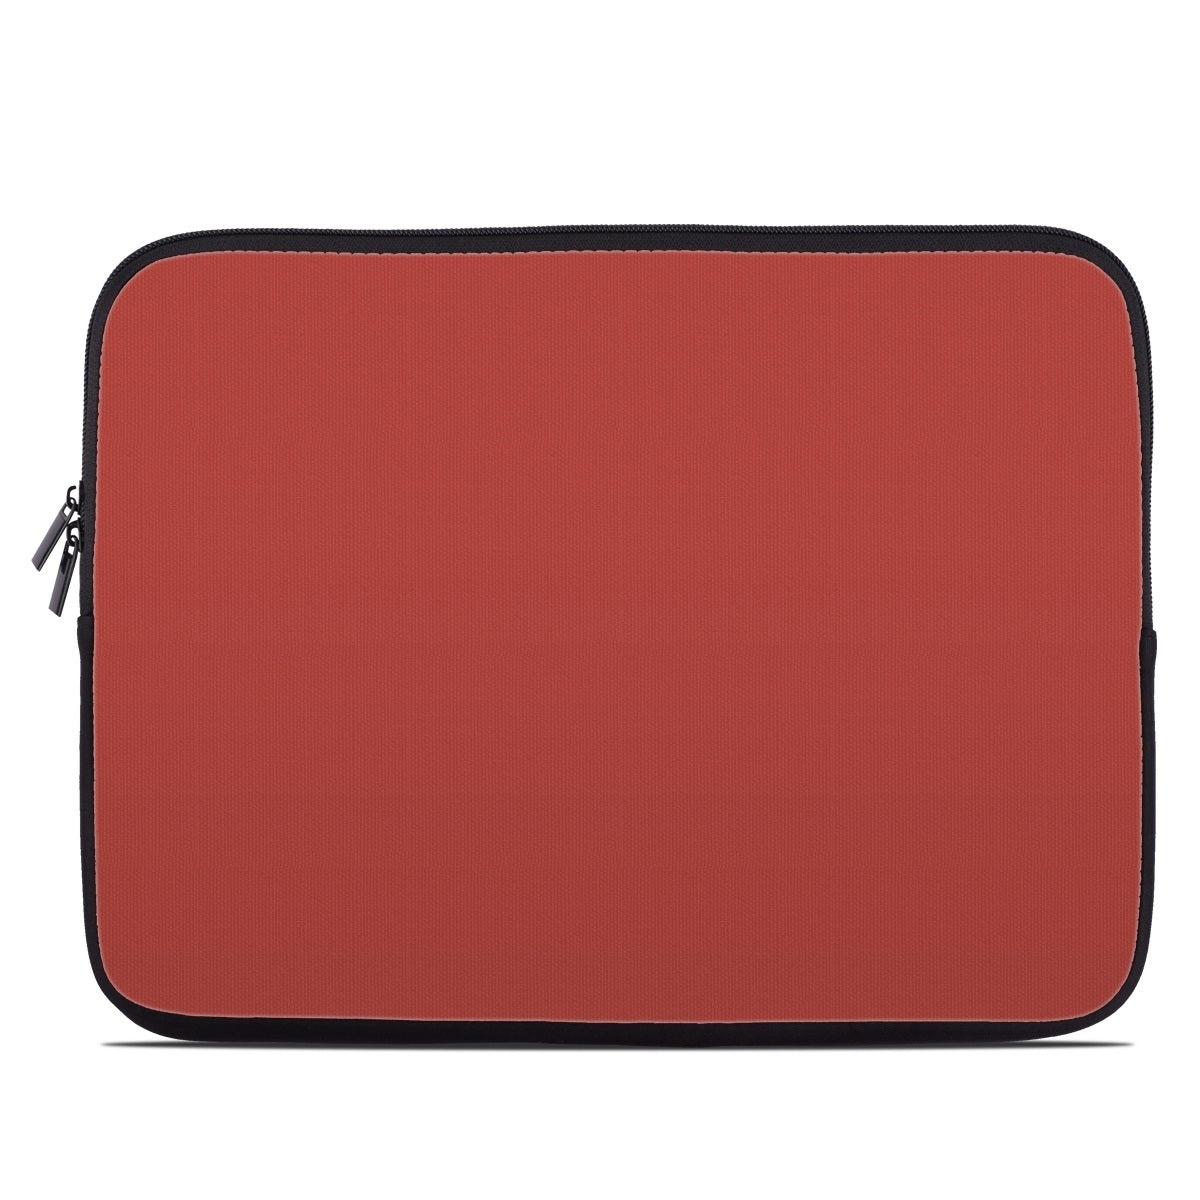 Solid State Berry - Laptop Sleeve